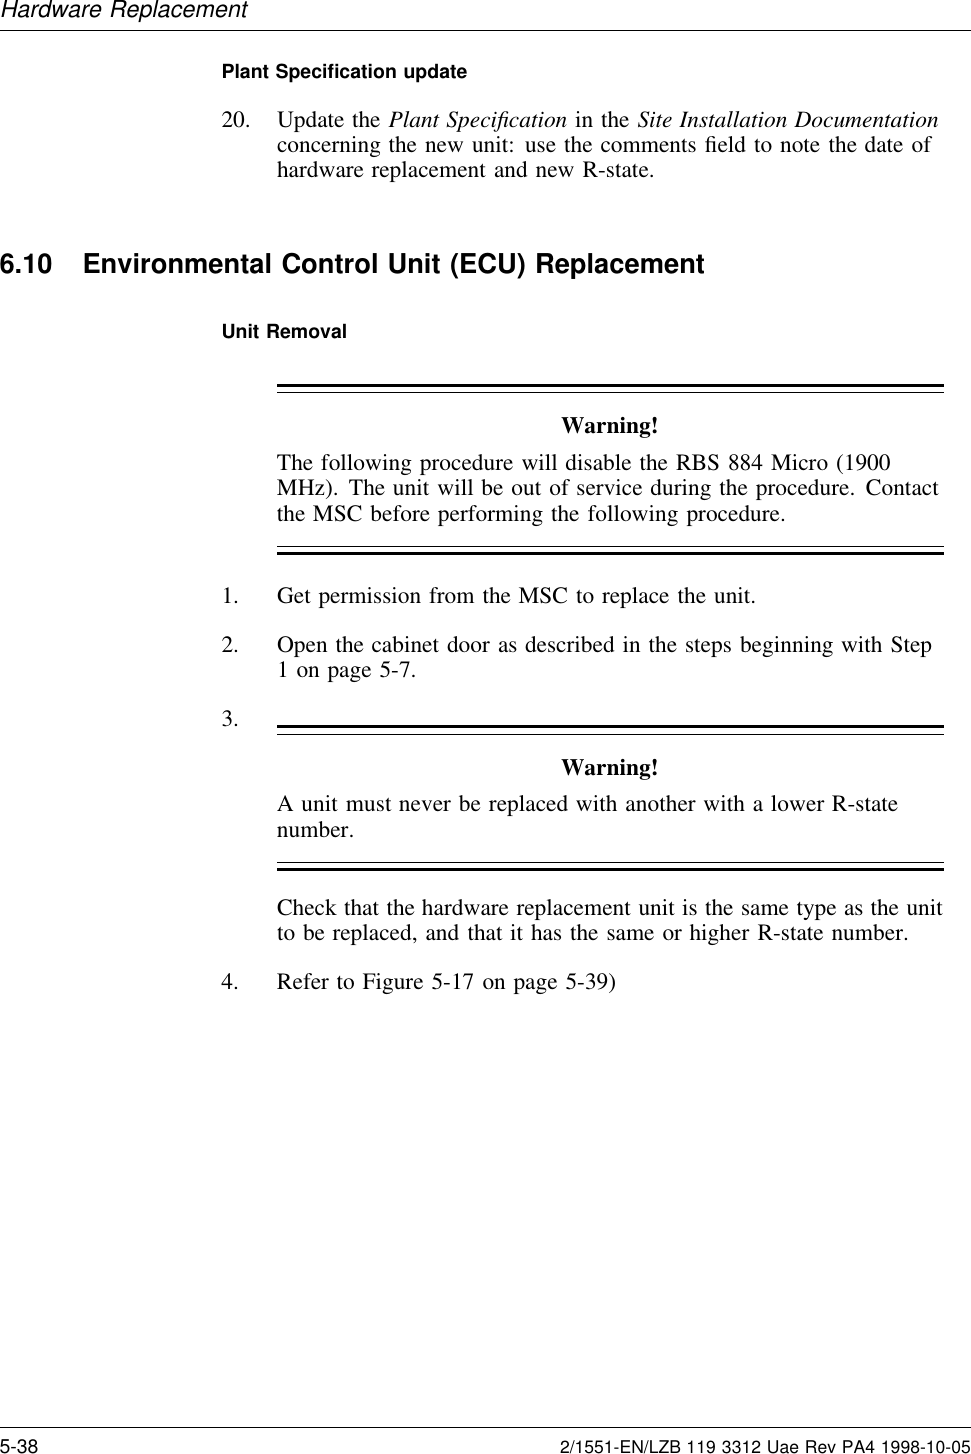 Hardware ReplacementPlant Speciﬁcation update20. Update the Plant Speciﬁcation in the Site Installation Documentationconcerning the new unit: use the comments ﬁeld to note the date ofhardware replacement and new R-state.6.10 Environmental Control Unit (ECU) ReplacementUnit RemovalWarning!The following procedure will disable the RBS 884 Micro (1900MHz). The unit will be out of service during the procedure. Contactthe MSC before performing the following procedure.1. Get permission from the MSC to replace the unit.2. Open the cabinet door as described in the steps beginning with Step1 on page 5-7.3.Warning!A unit must never be replaced with another with a lower R-statenumber.Check that the hardware replacement unit is the same type as the unitto be replaced, and that it has the same or higher R-state number.4. Refer to Figure 5-17 on page 5-39)5-38 2/1551-EN/LZB 119 3312 Uae Rev PA4 1998-10-05